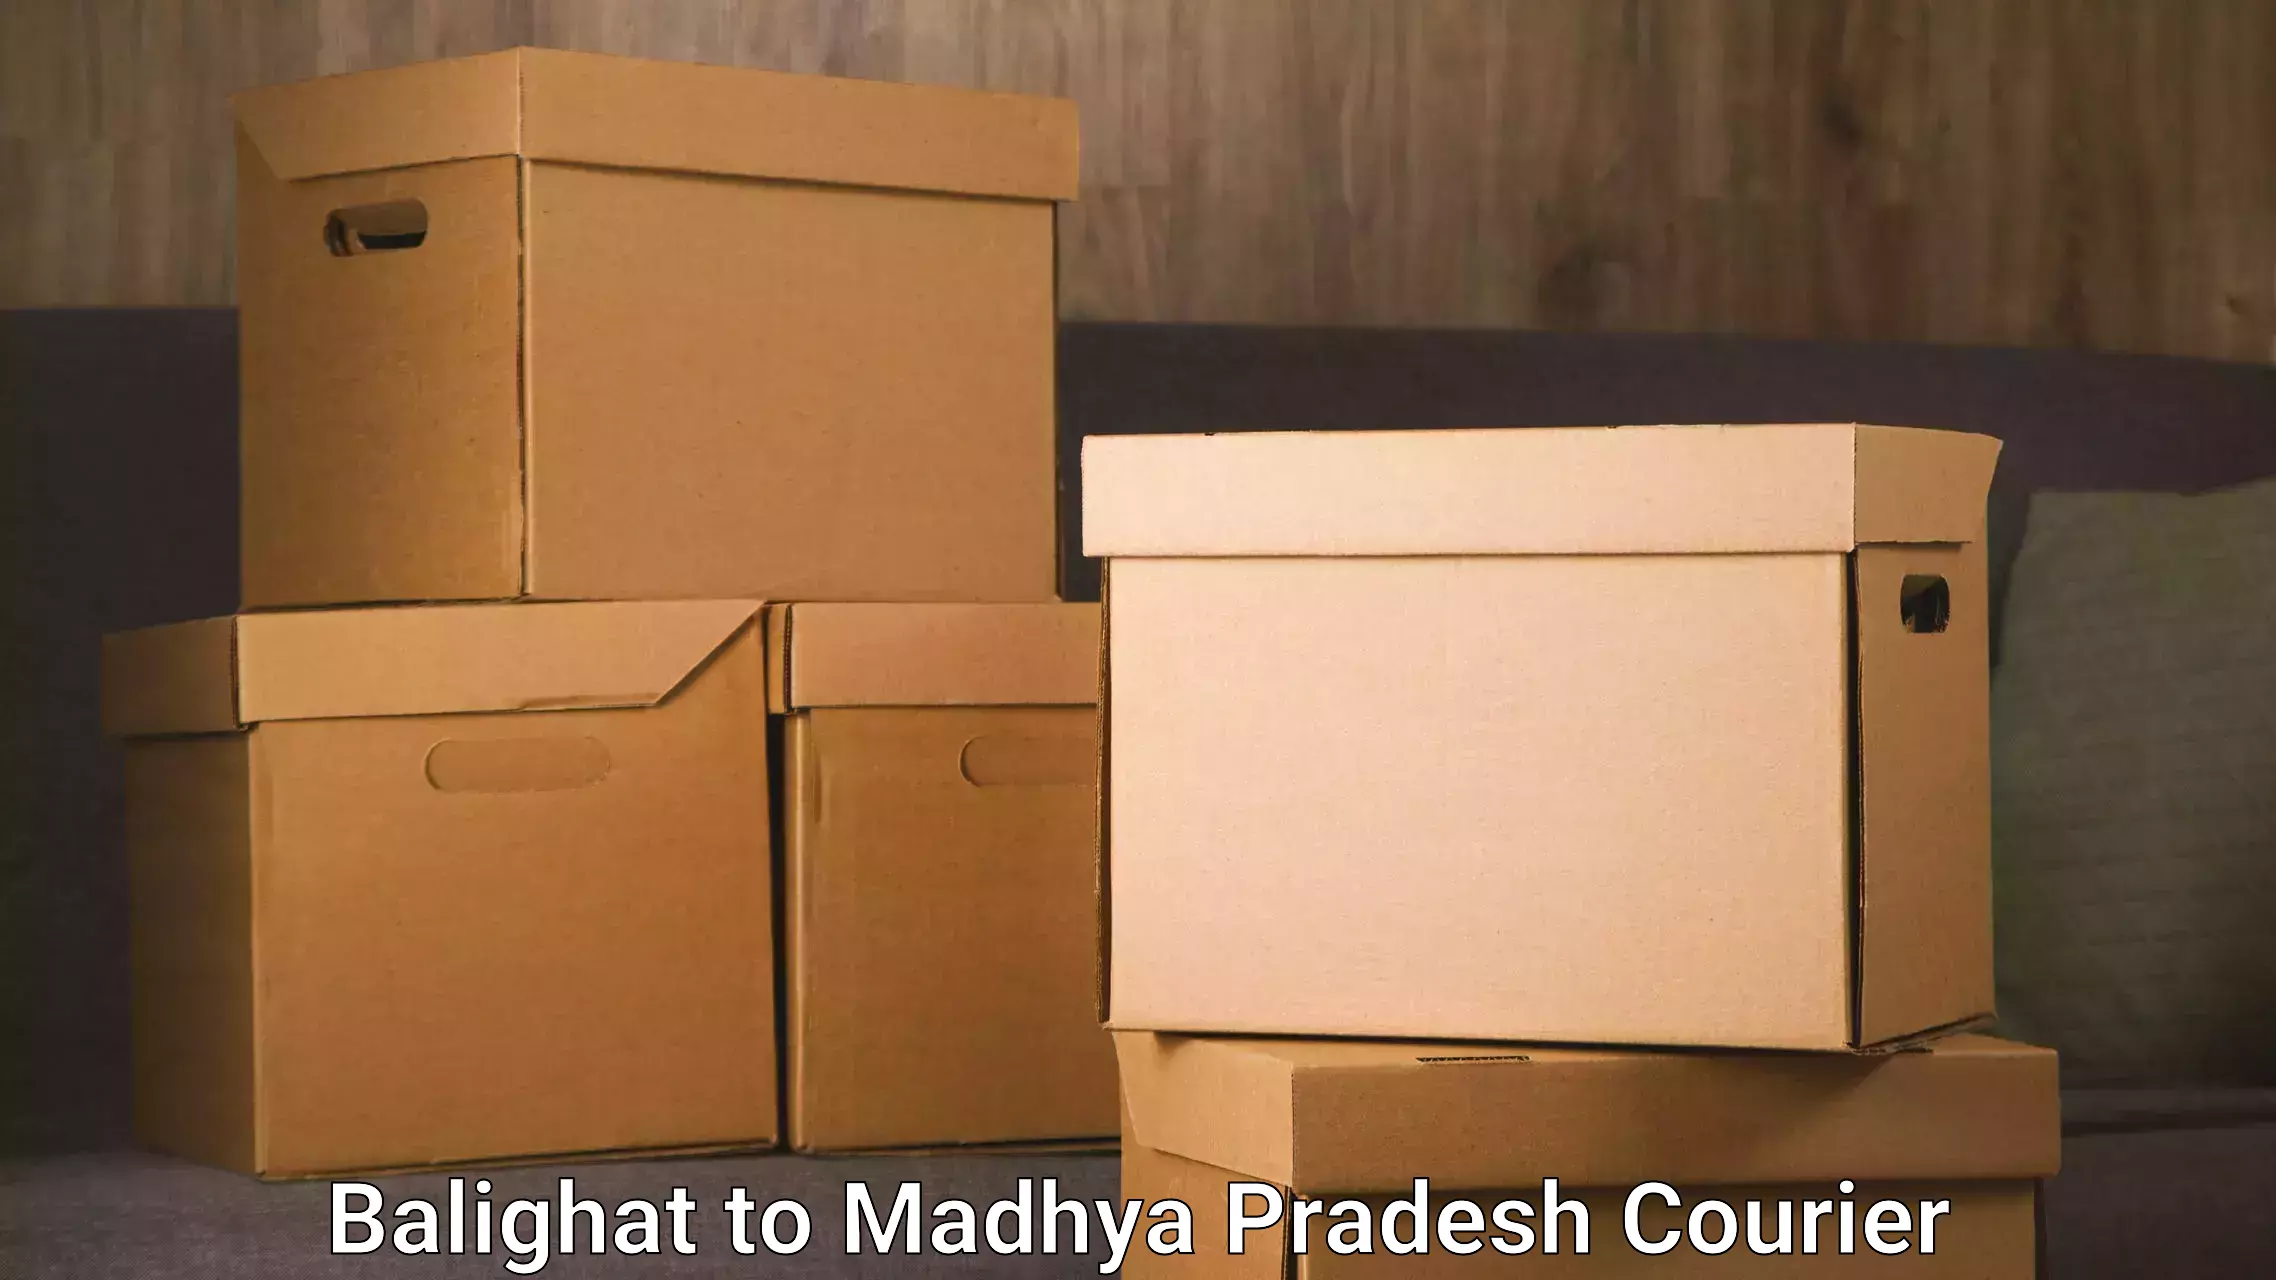 Reliable courier services in Balighat to Indore